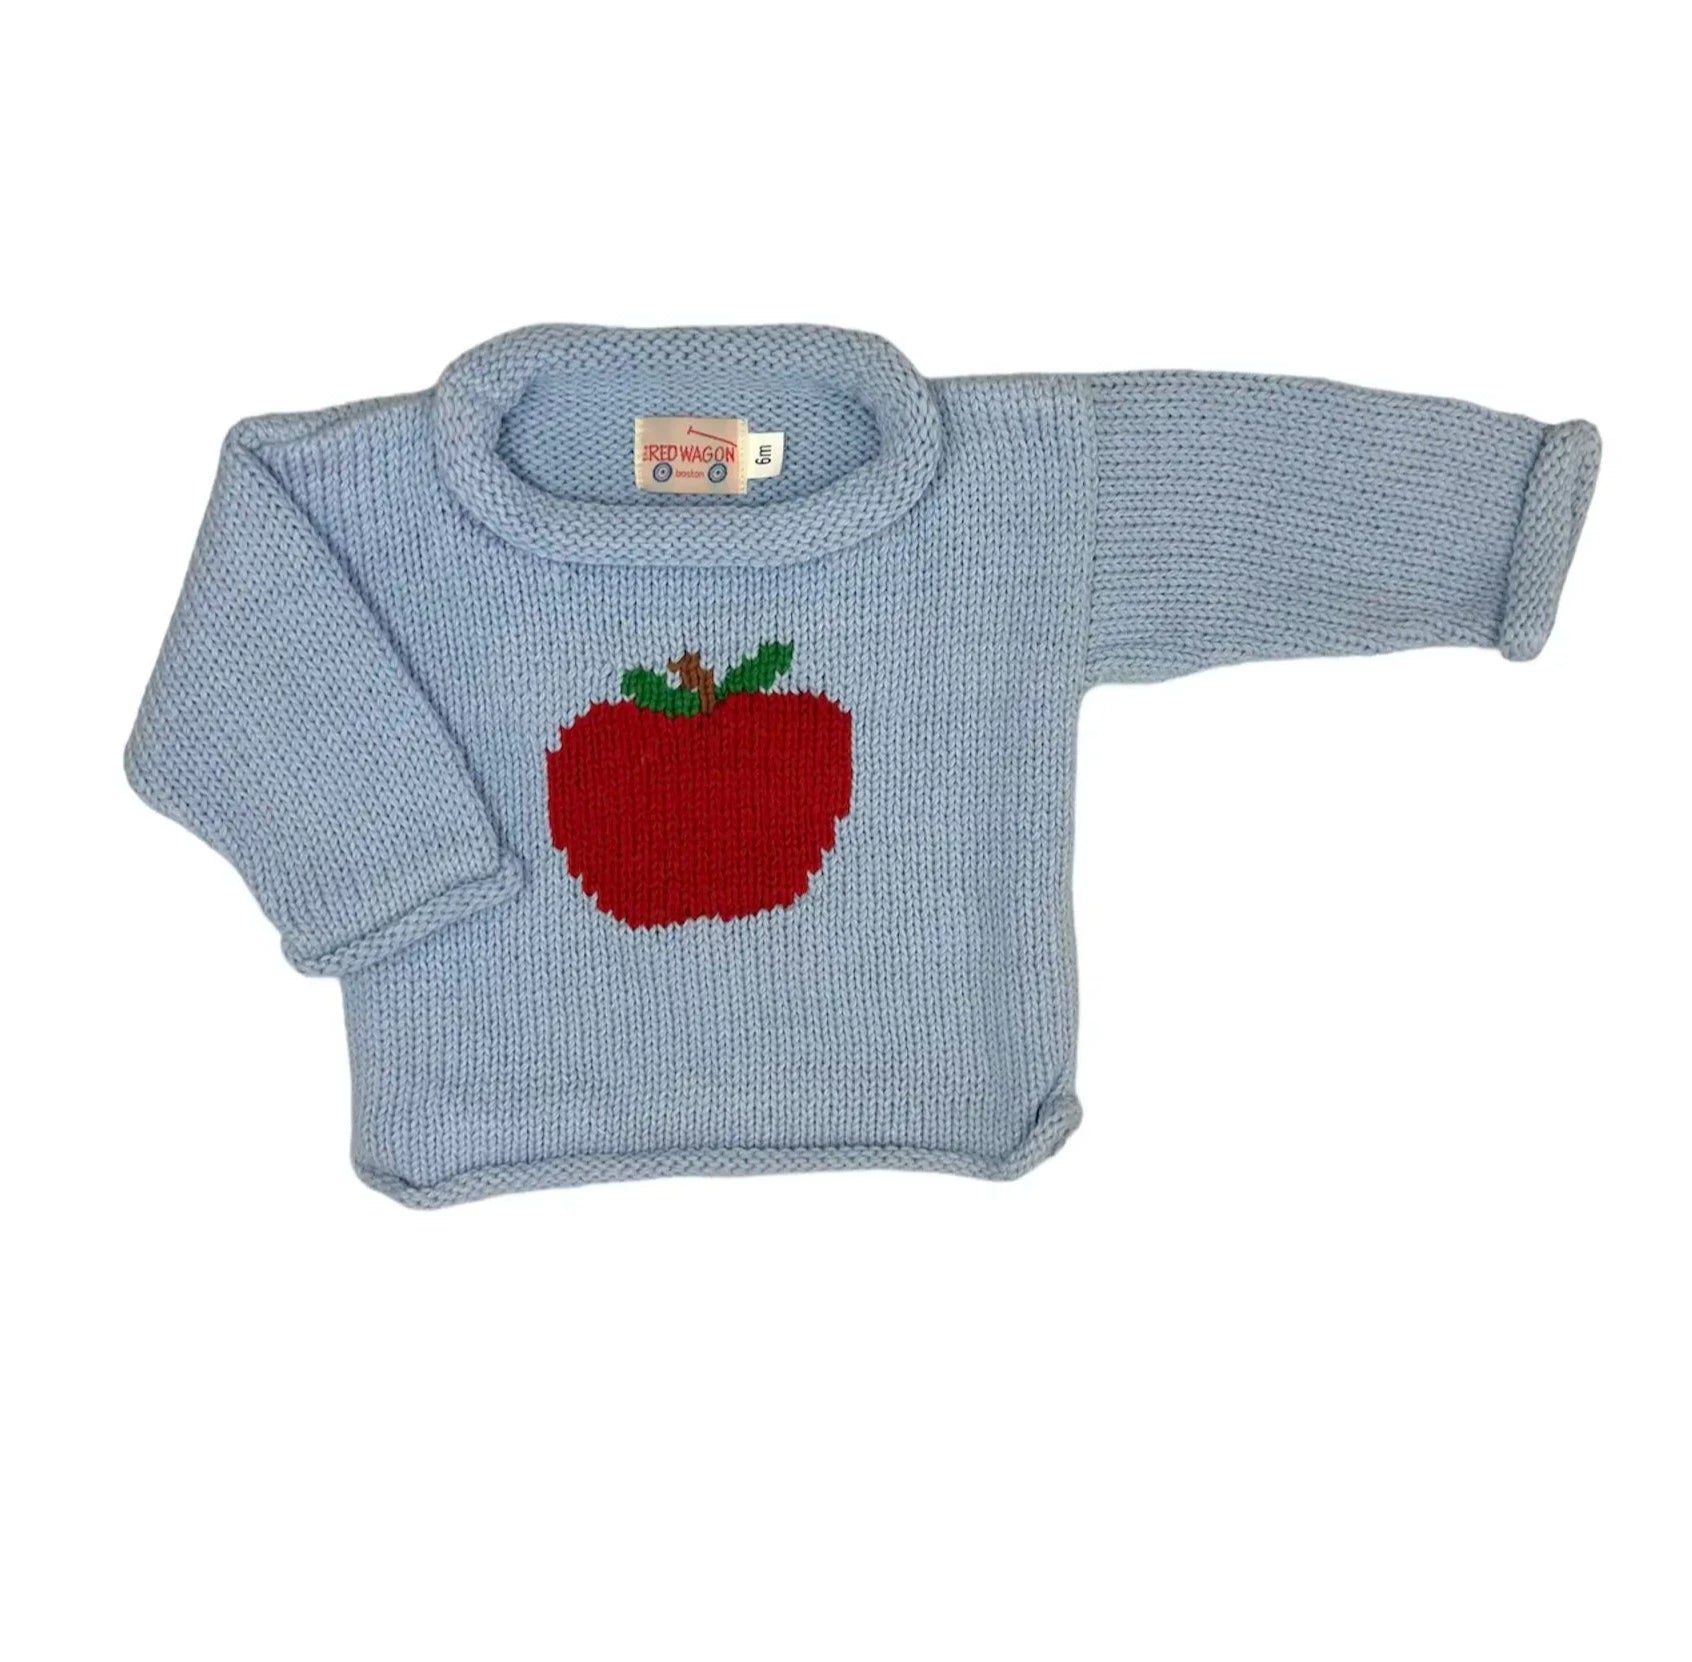 long sleeve light blue sweater with red apple in center